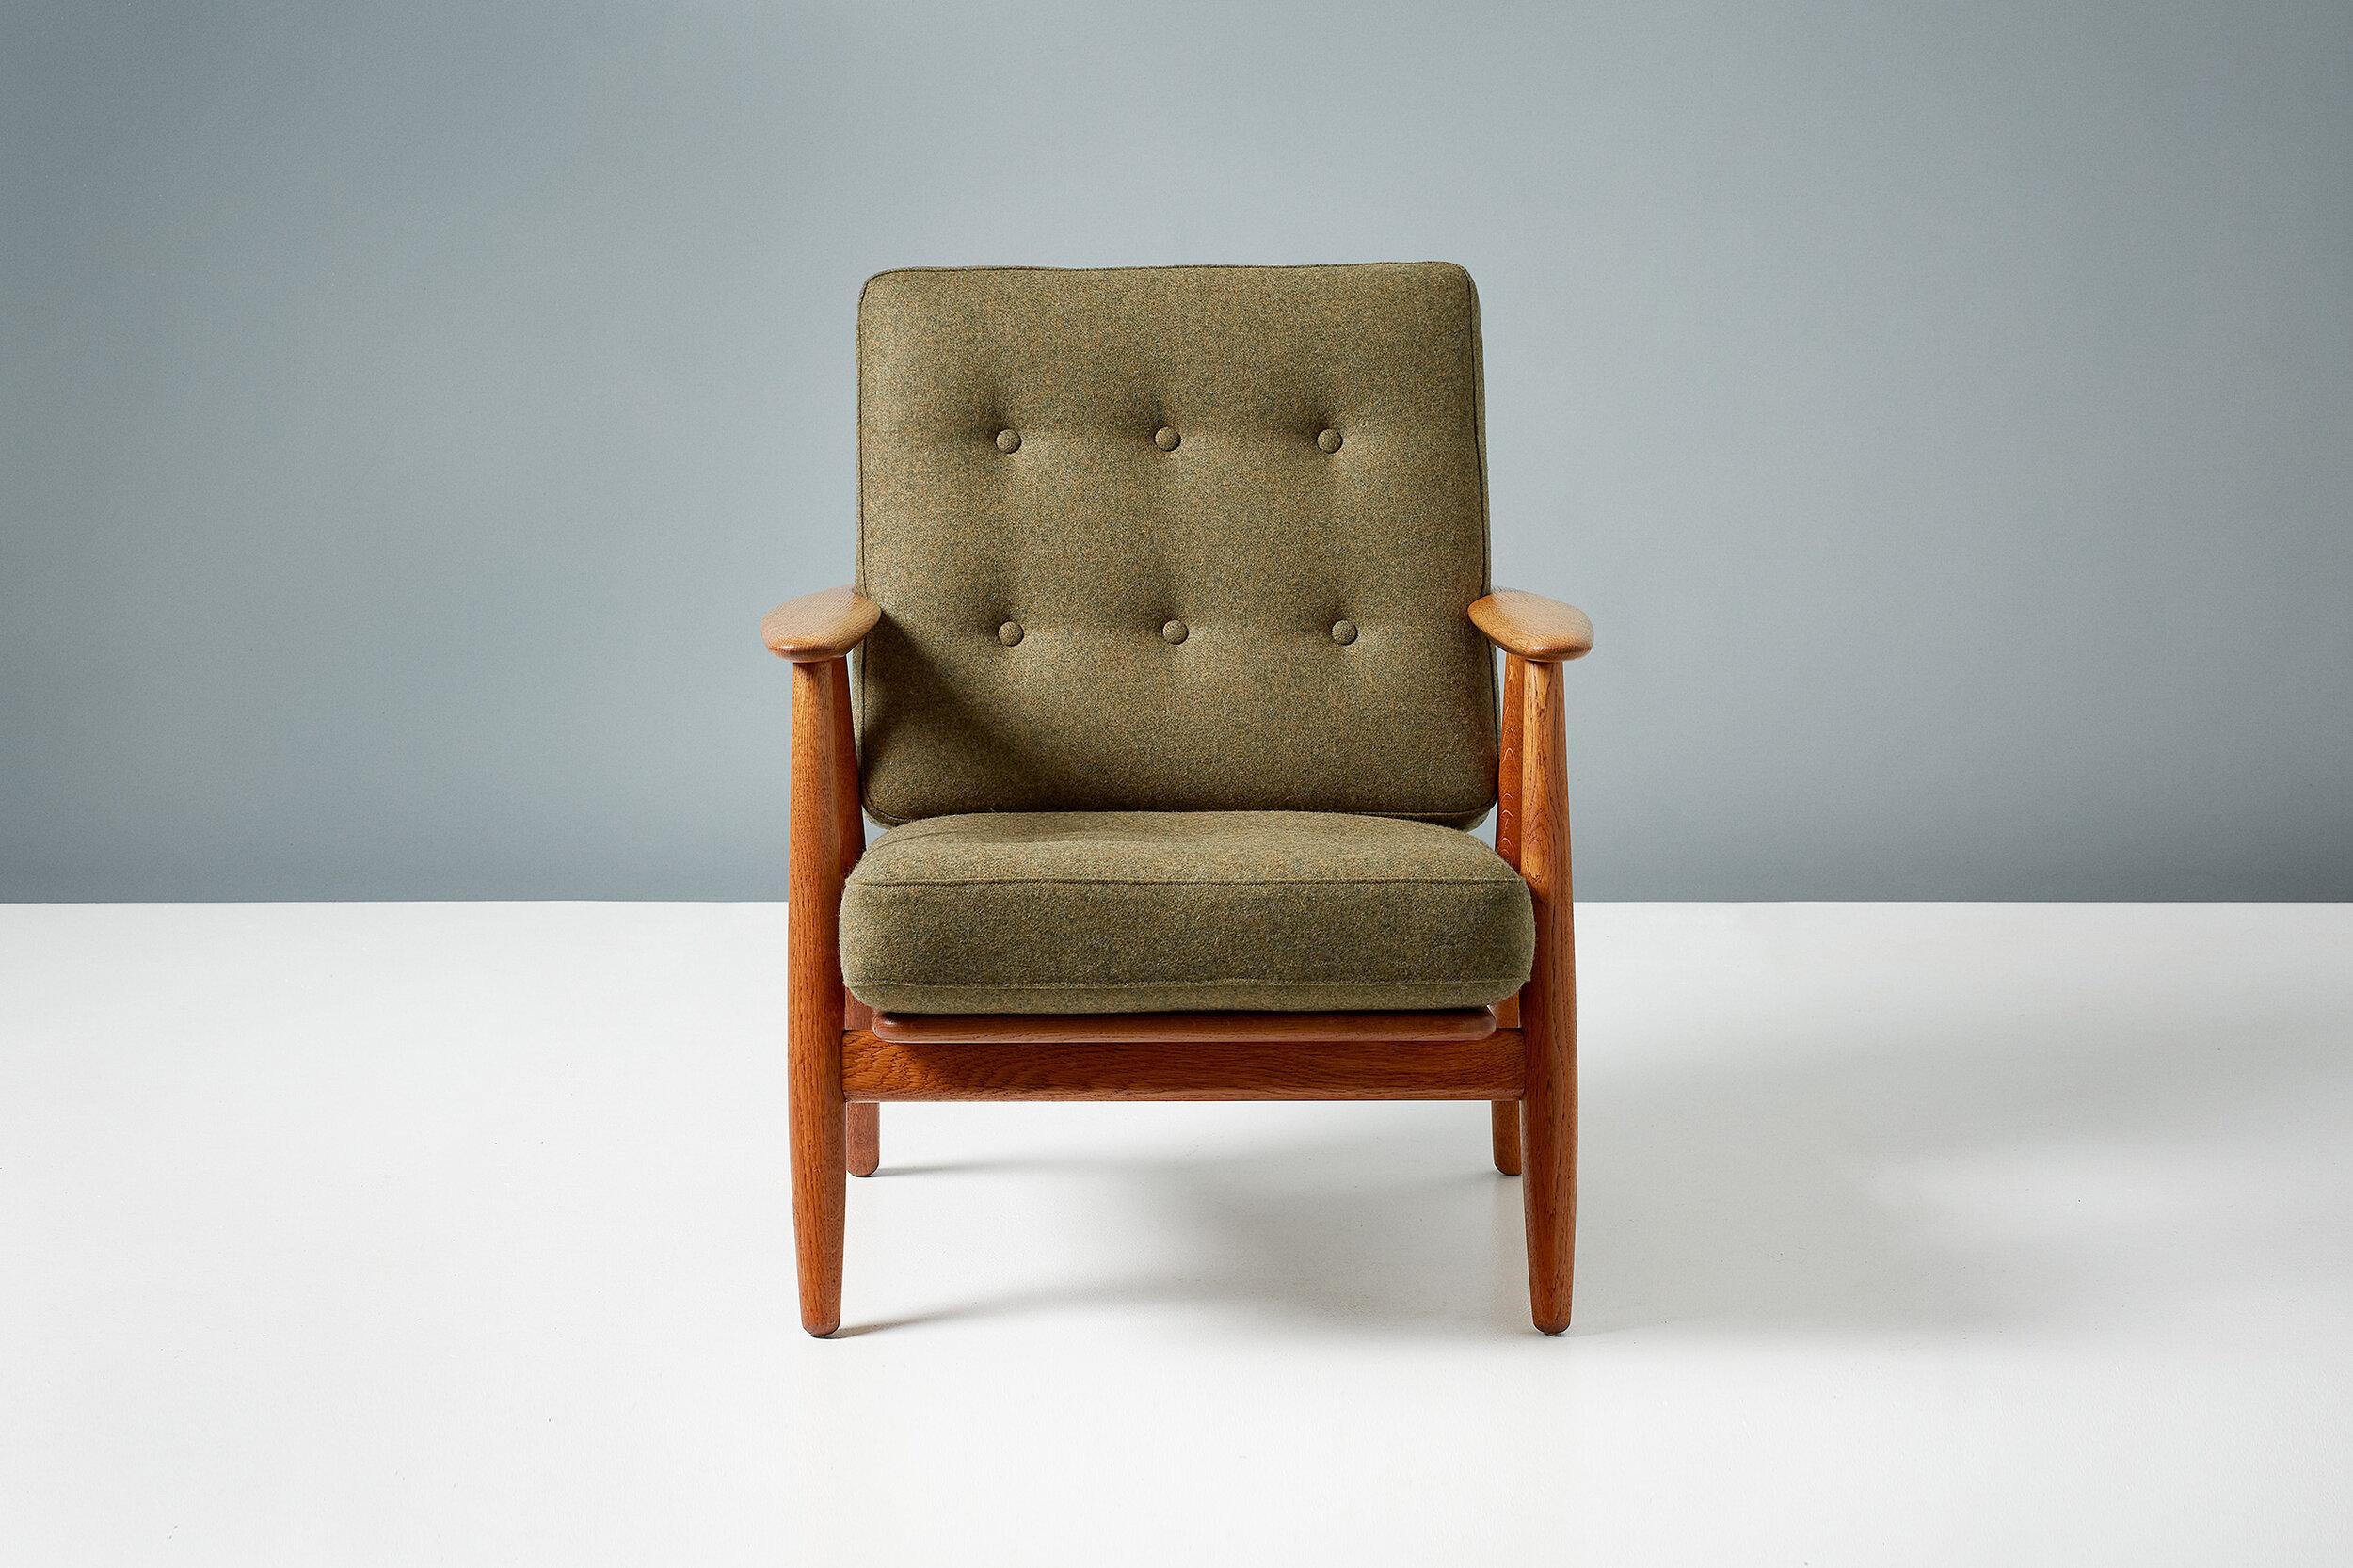 Hans J. Wegner

GE-240 Cigar Chair

Produced by GETAMA in Gedsted, Denmark in the 1950s. This example of Wegner's iconic lounge chair is made from European oak, with the original sprung cushions reupholstered in fern green wool fabric by Abraham